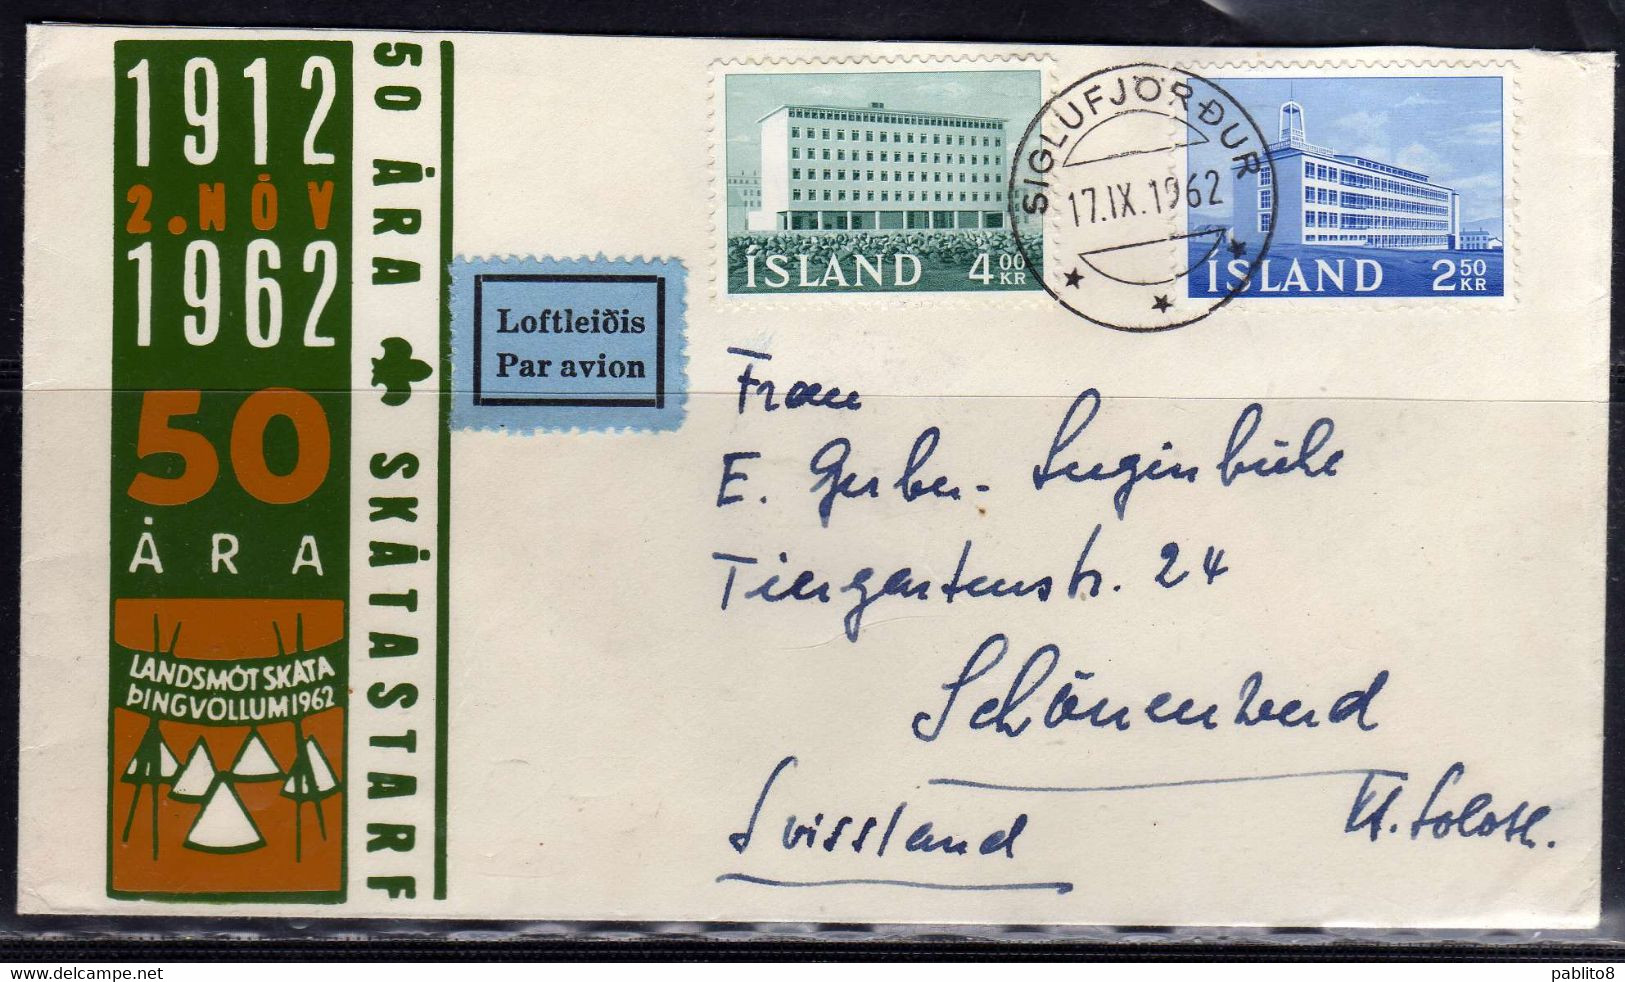 ISLANDA ICELAND ISLANDE 1962 NEW BUILDINGS PRODUCTION INSTITUTE FISHING REASEARCH 2.50 + 4k PAR AVION AIR MAIL COVER - Covers & Documents